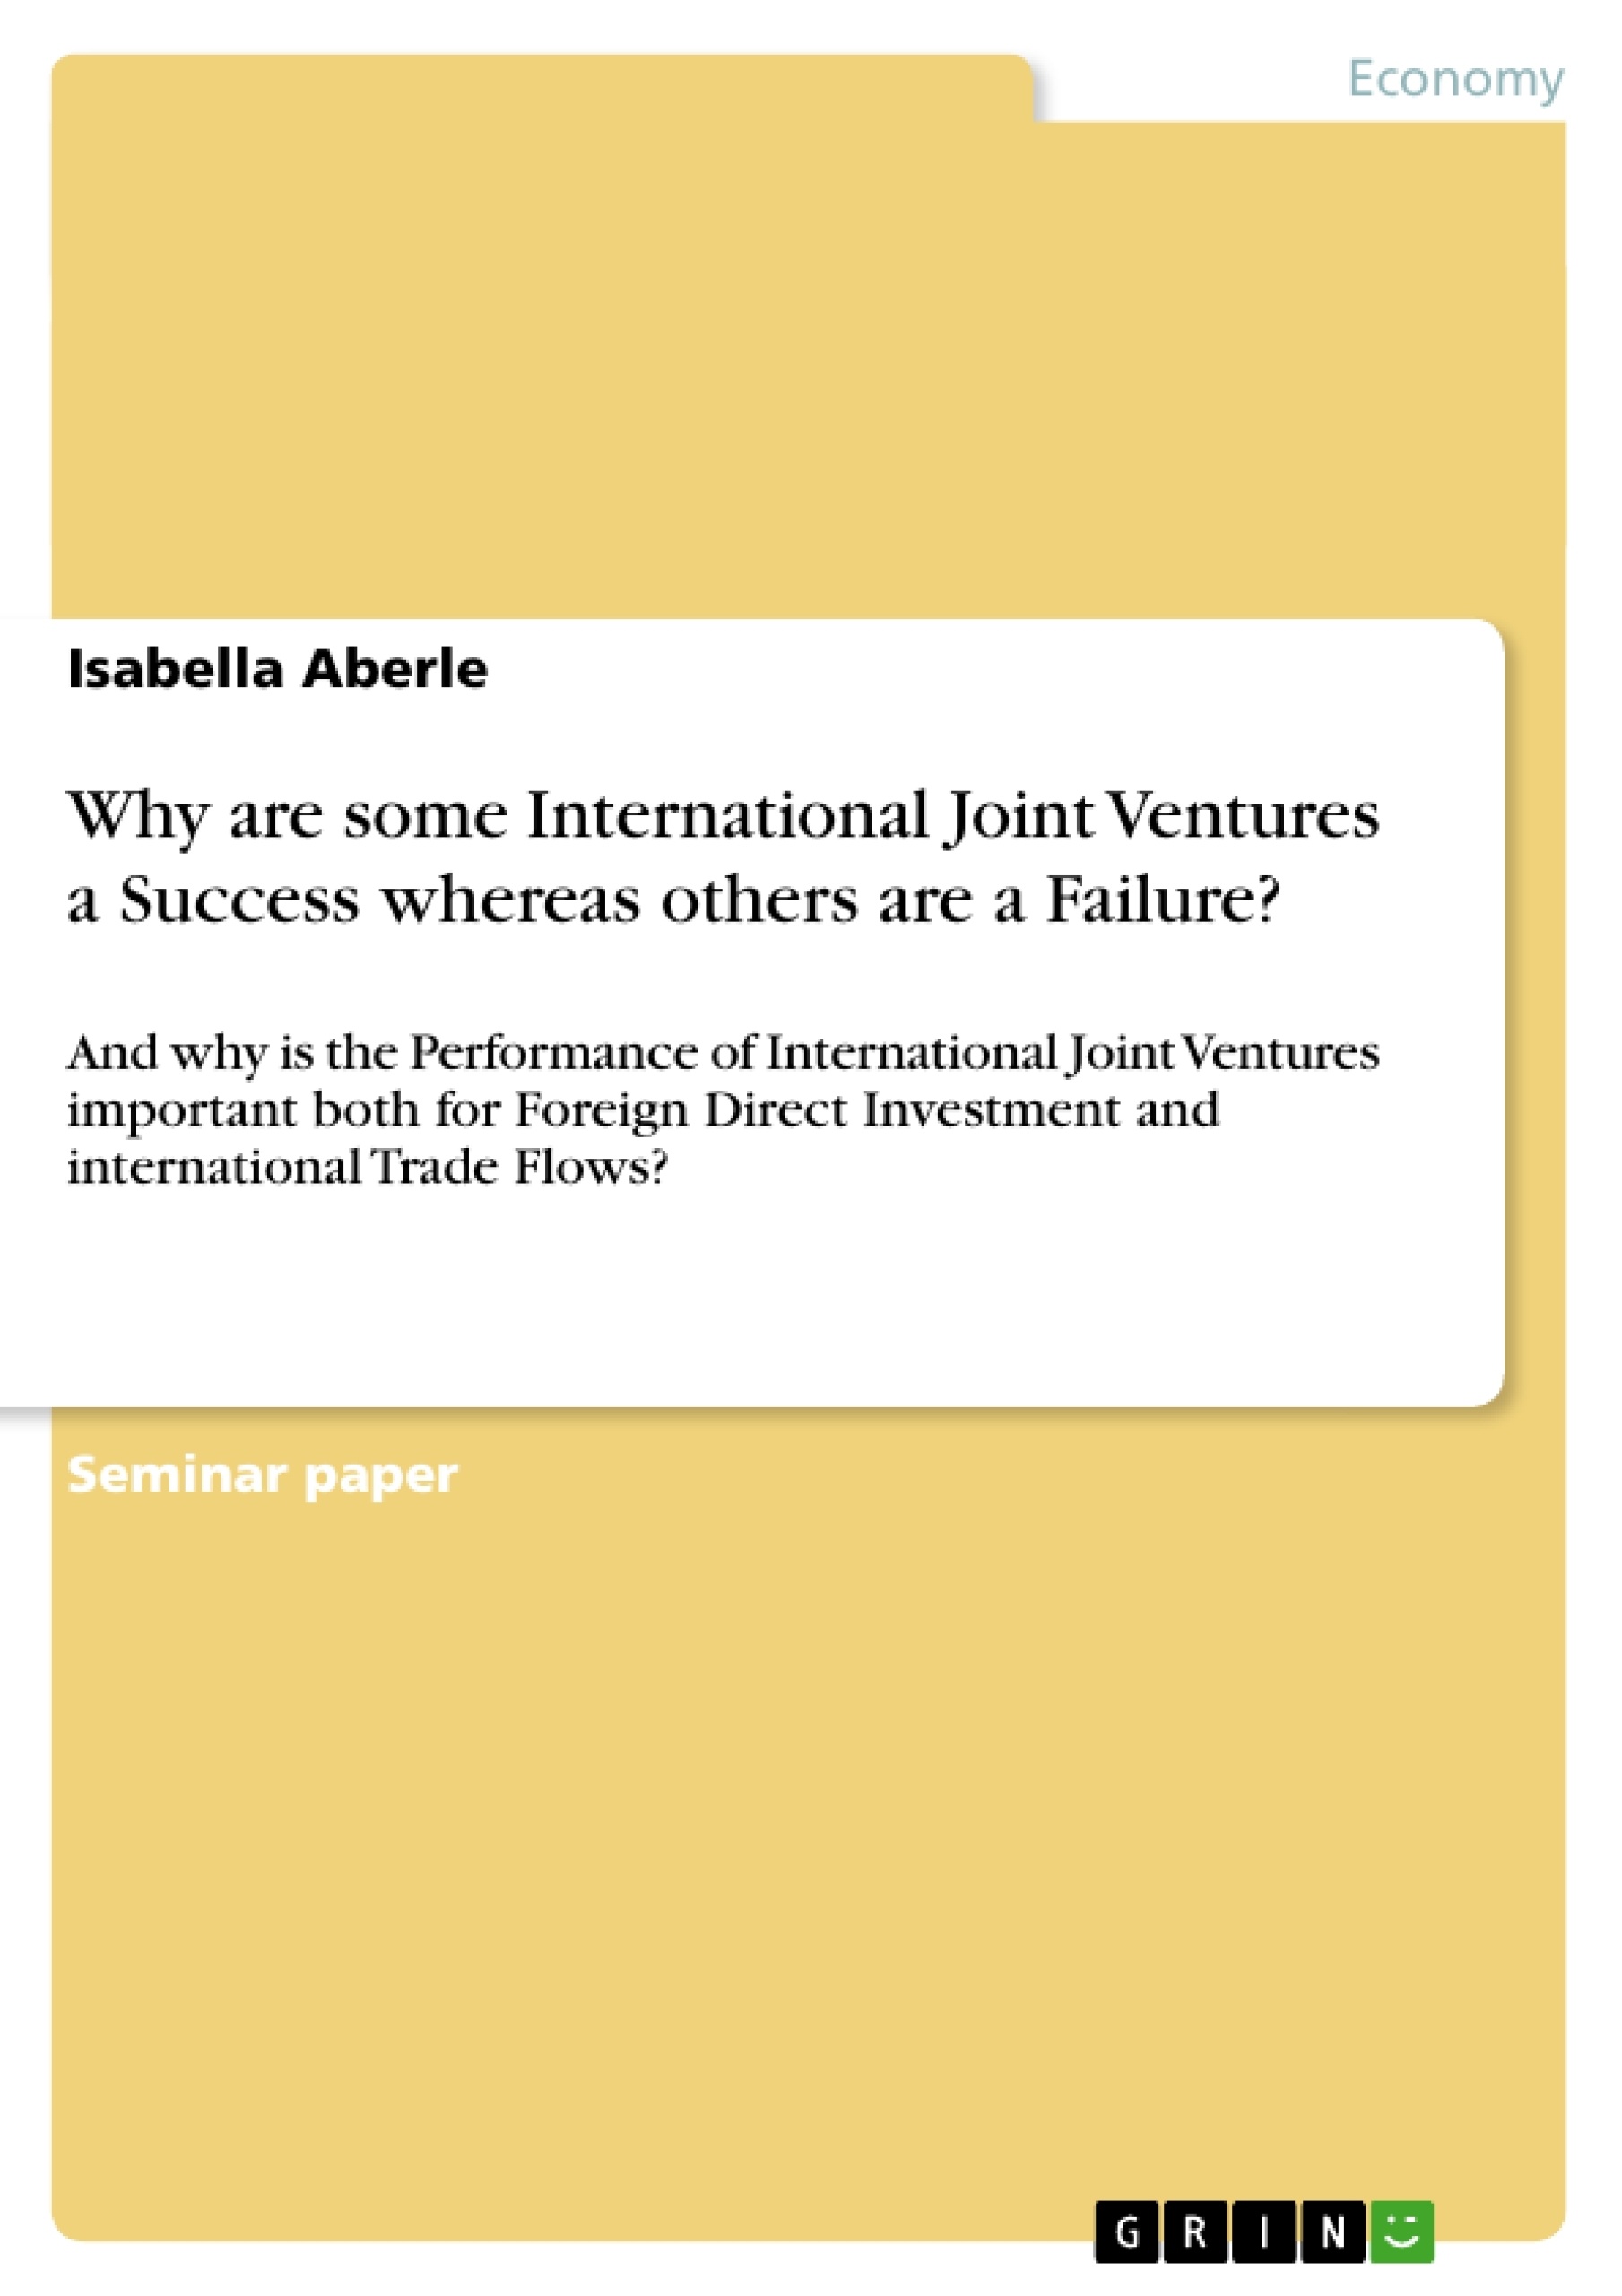 Title: Why are some International Joint Ventures a Success whereas others are a Failure?